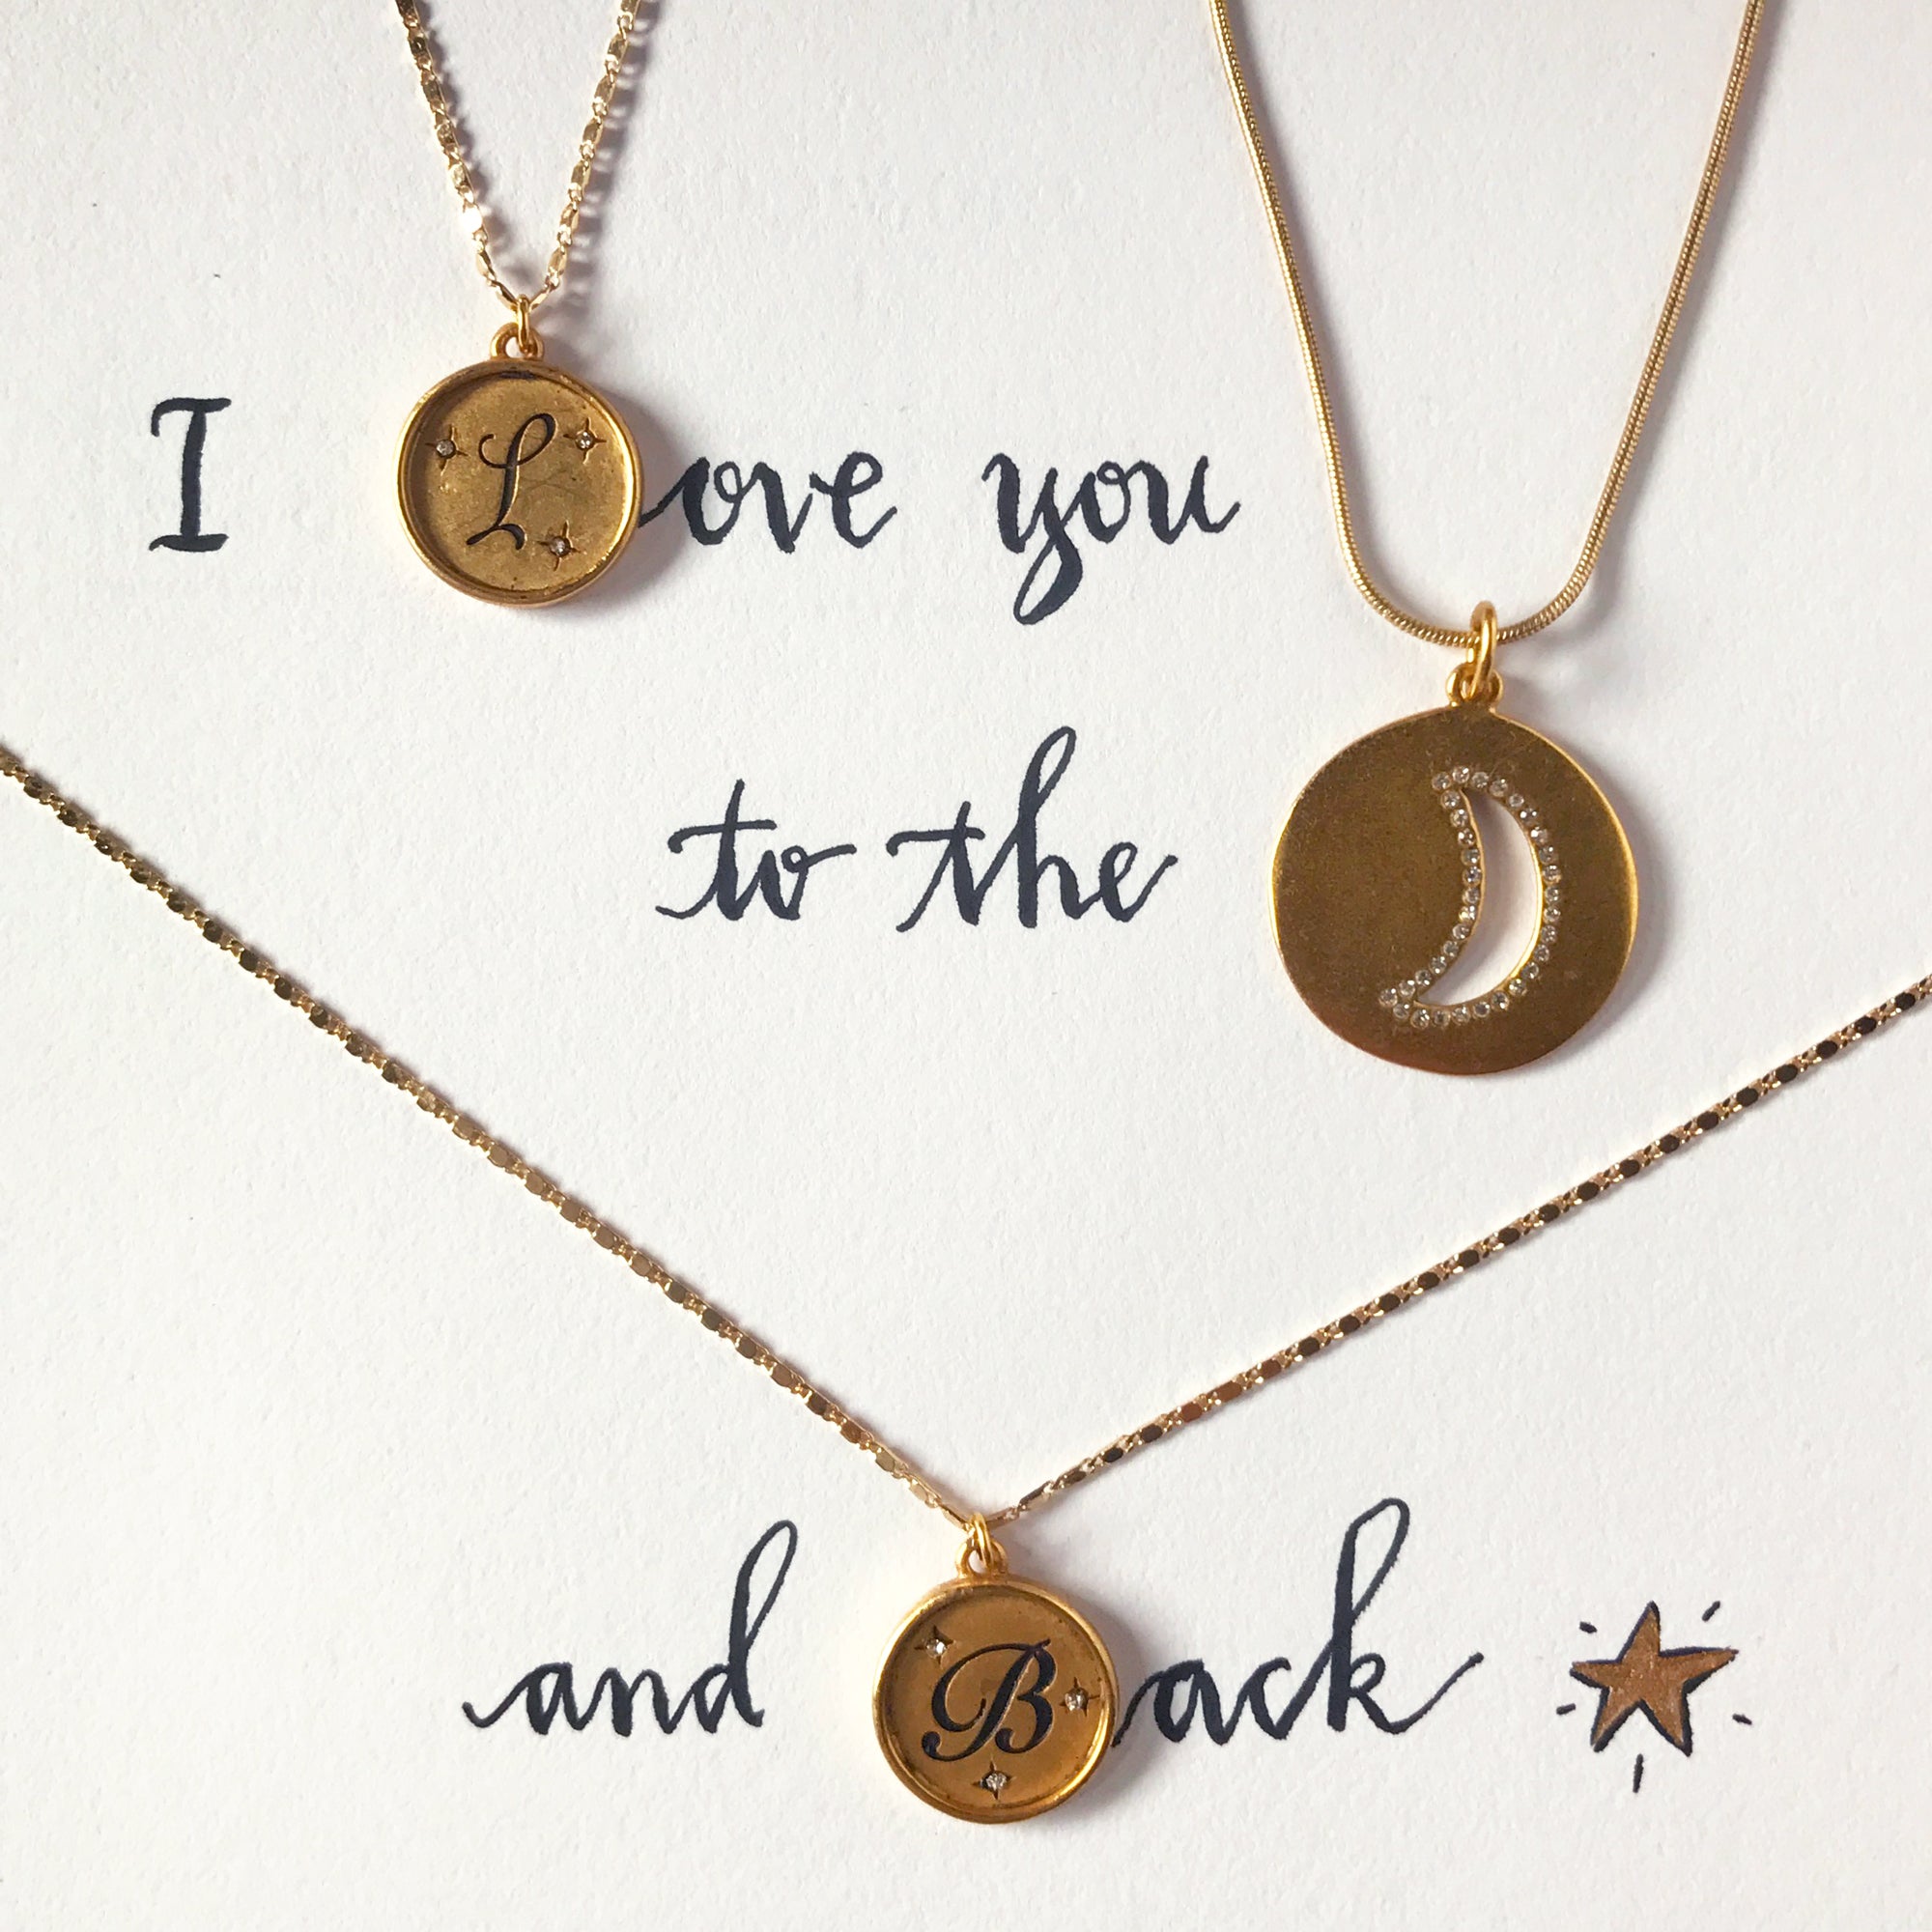 #SequinSayings - I Love You to the Moon...